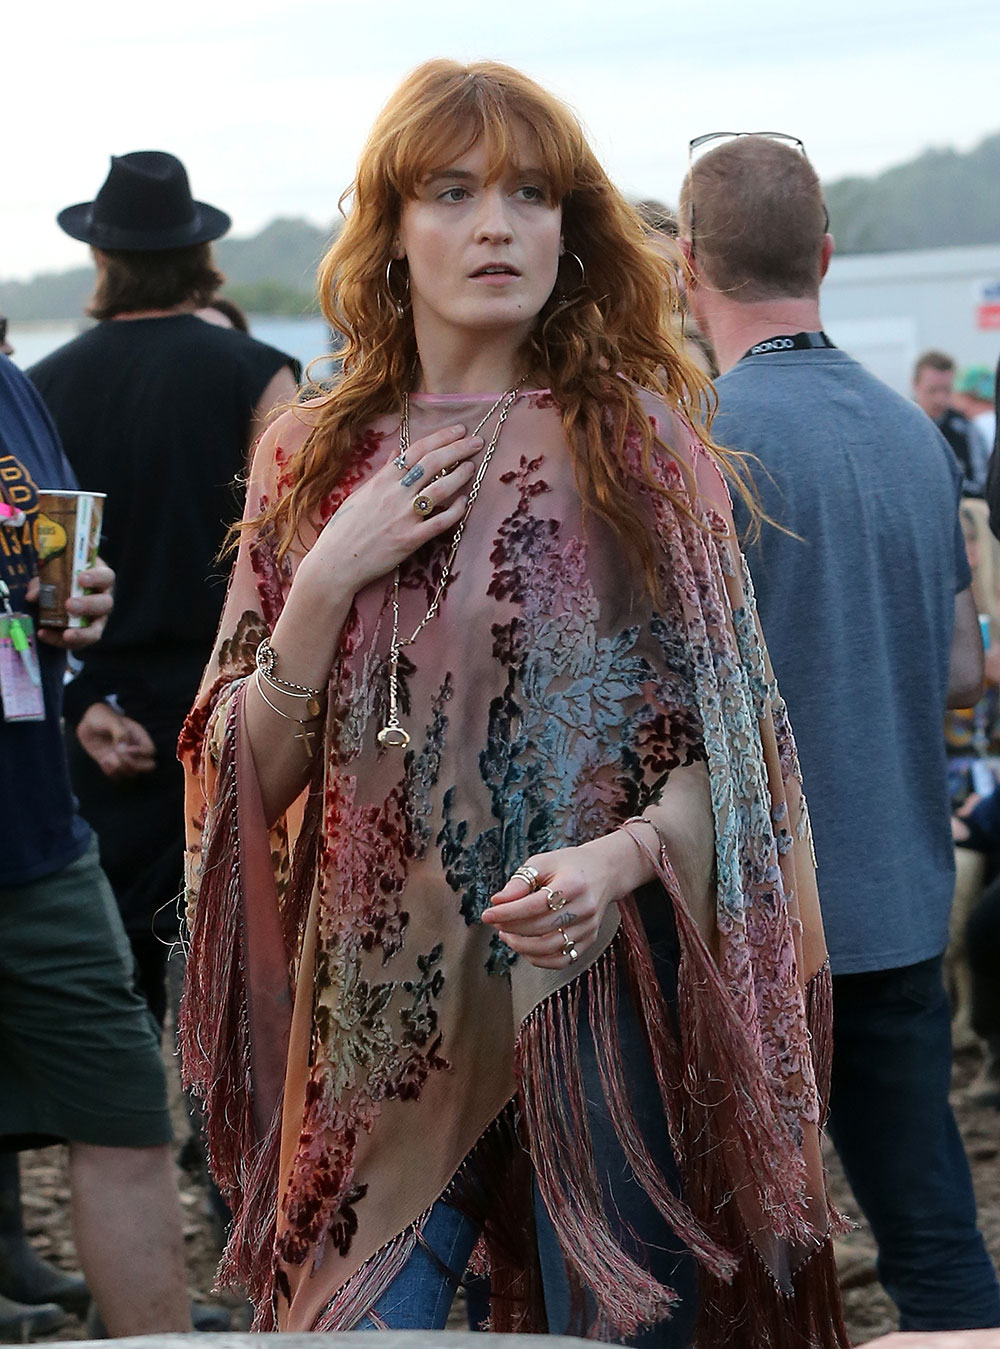 Florence Welch of Florence and the Machine at Glastonbury